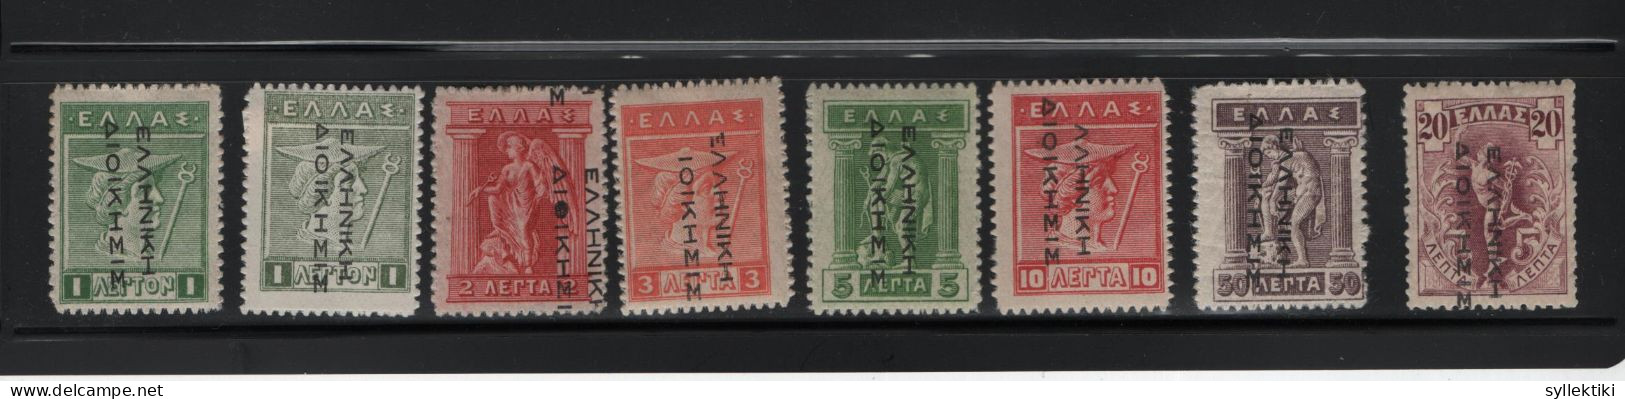 GREECE 1913 GREEK ADMIN READING DOWN 1 LEPTON - 20 LEPTA 8 DIFFERENT MH STAMPS  HELLAS No 251 - 255, 258 - 260 AND VALU - Neufs